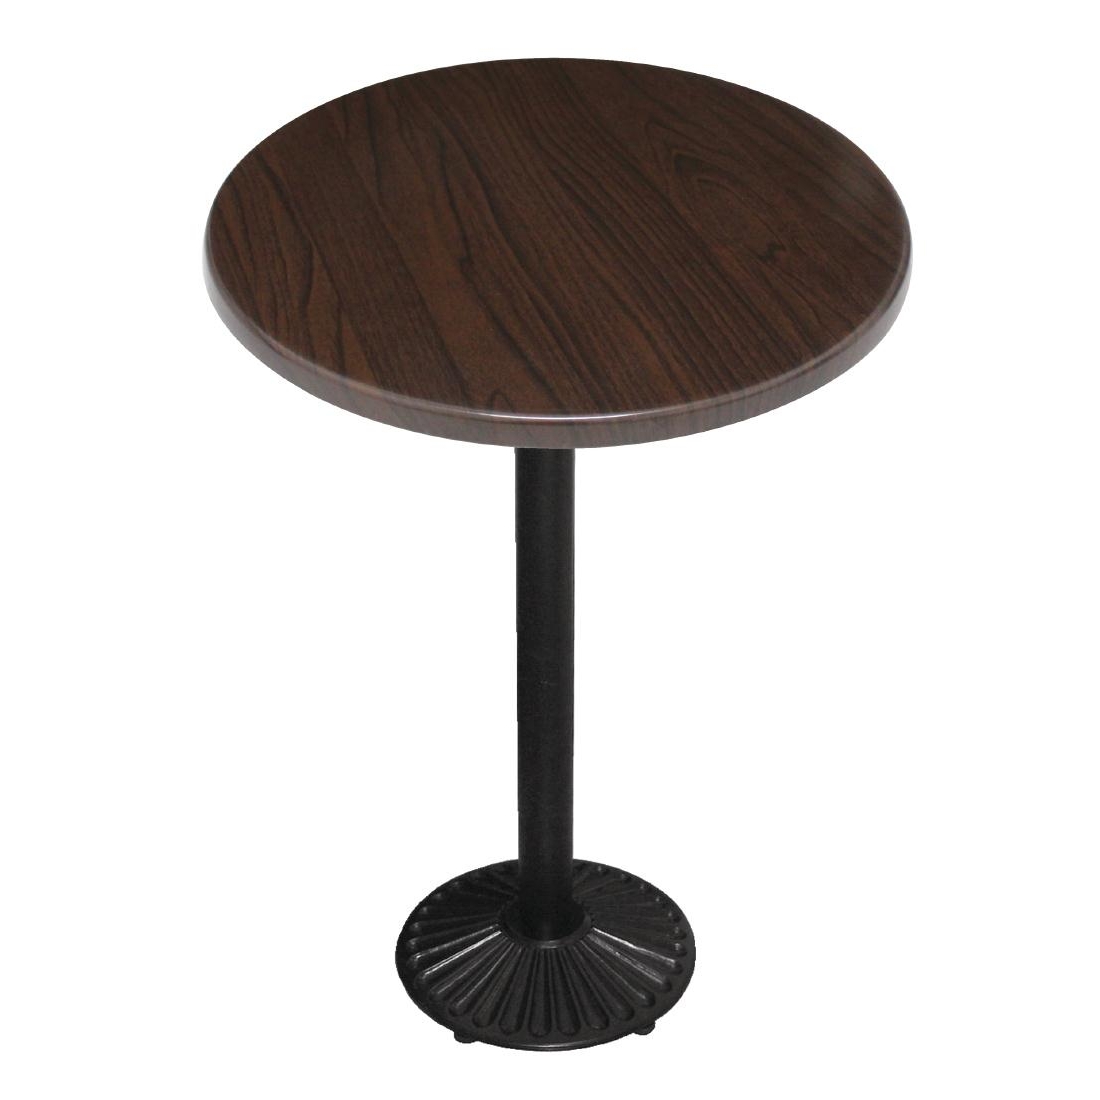 Special Offer Bolero 600mm Dark Wood Bar Table and Cast Iron Base Combo